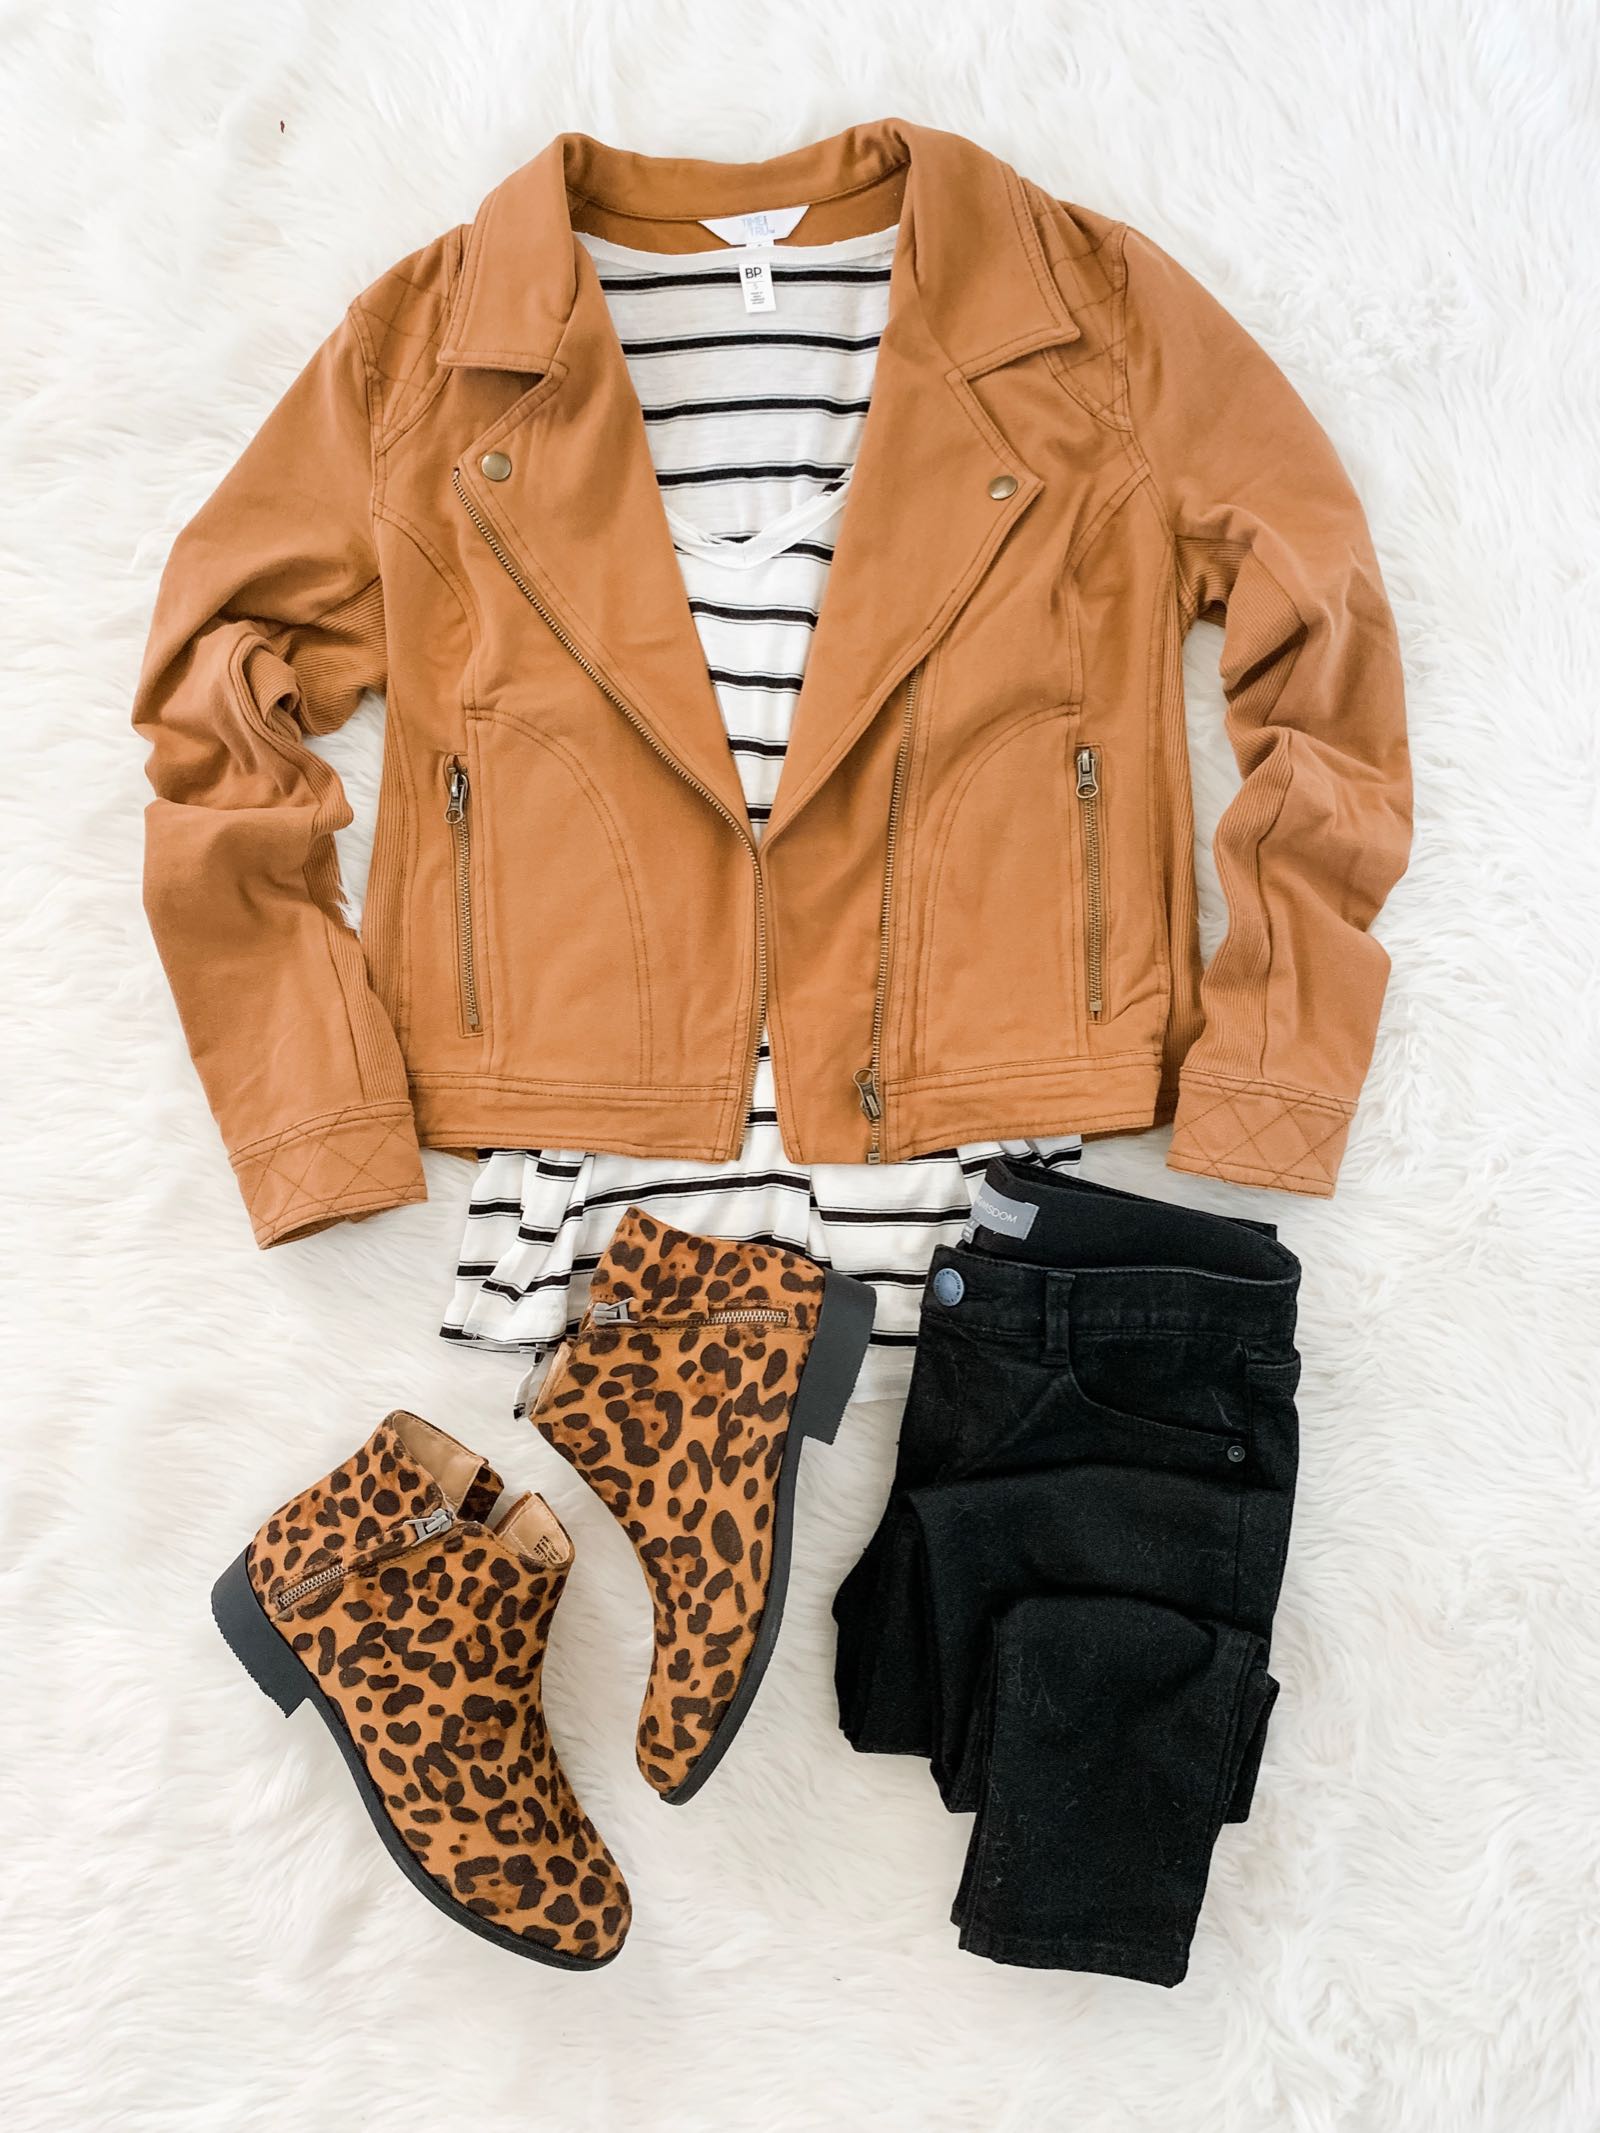 Moto jacket outfit idea for fall featuring camel jacket, striped top and leopard print booties